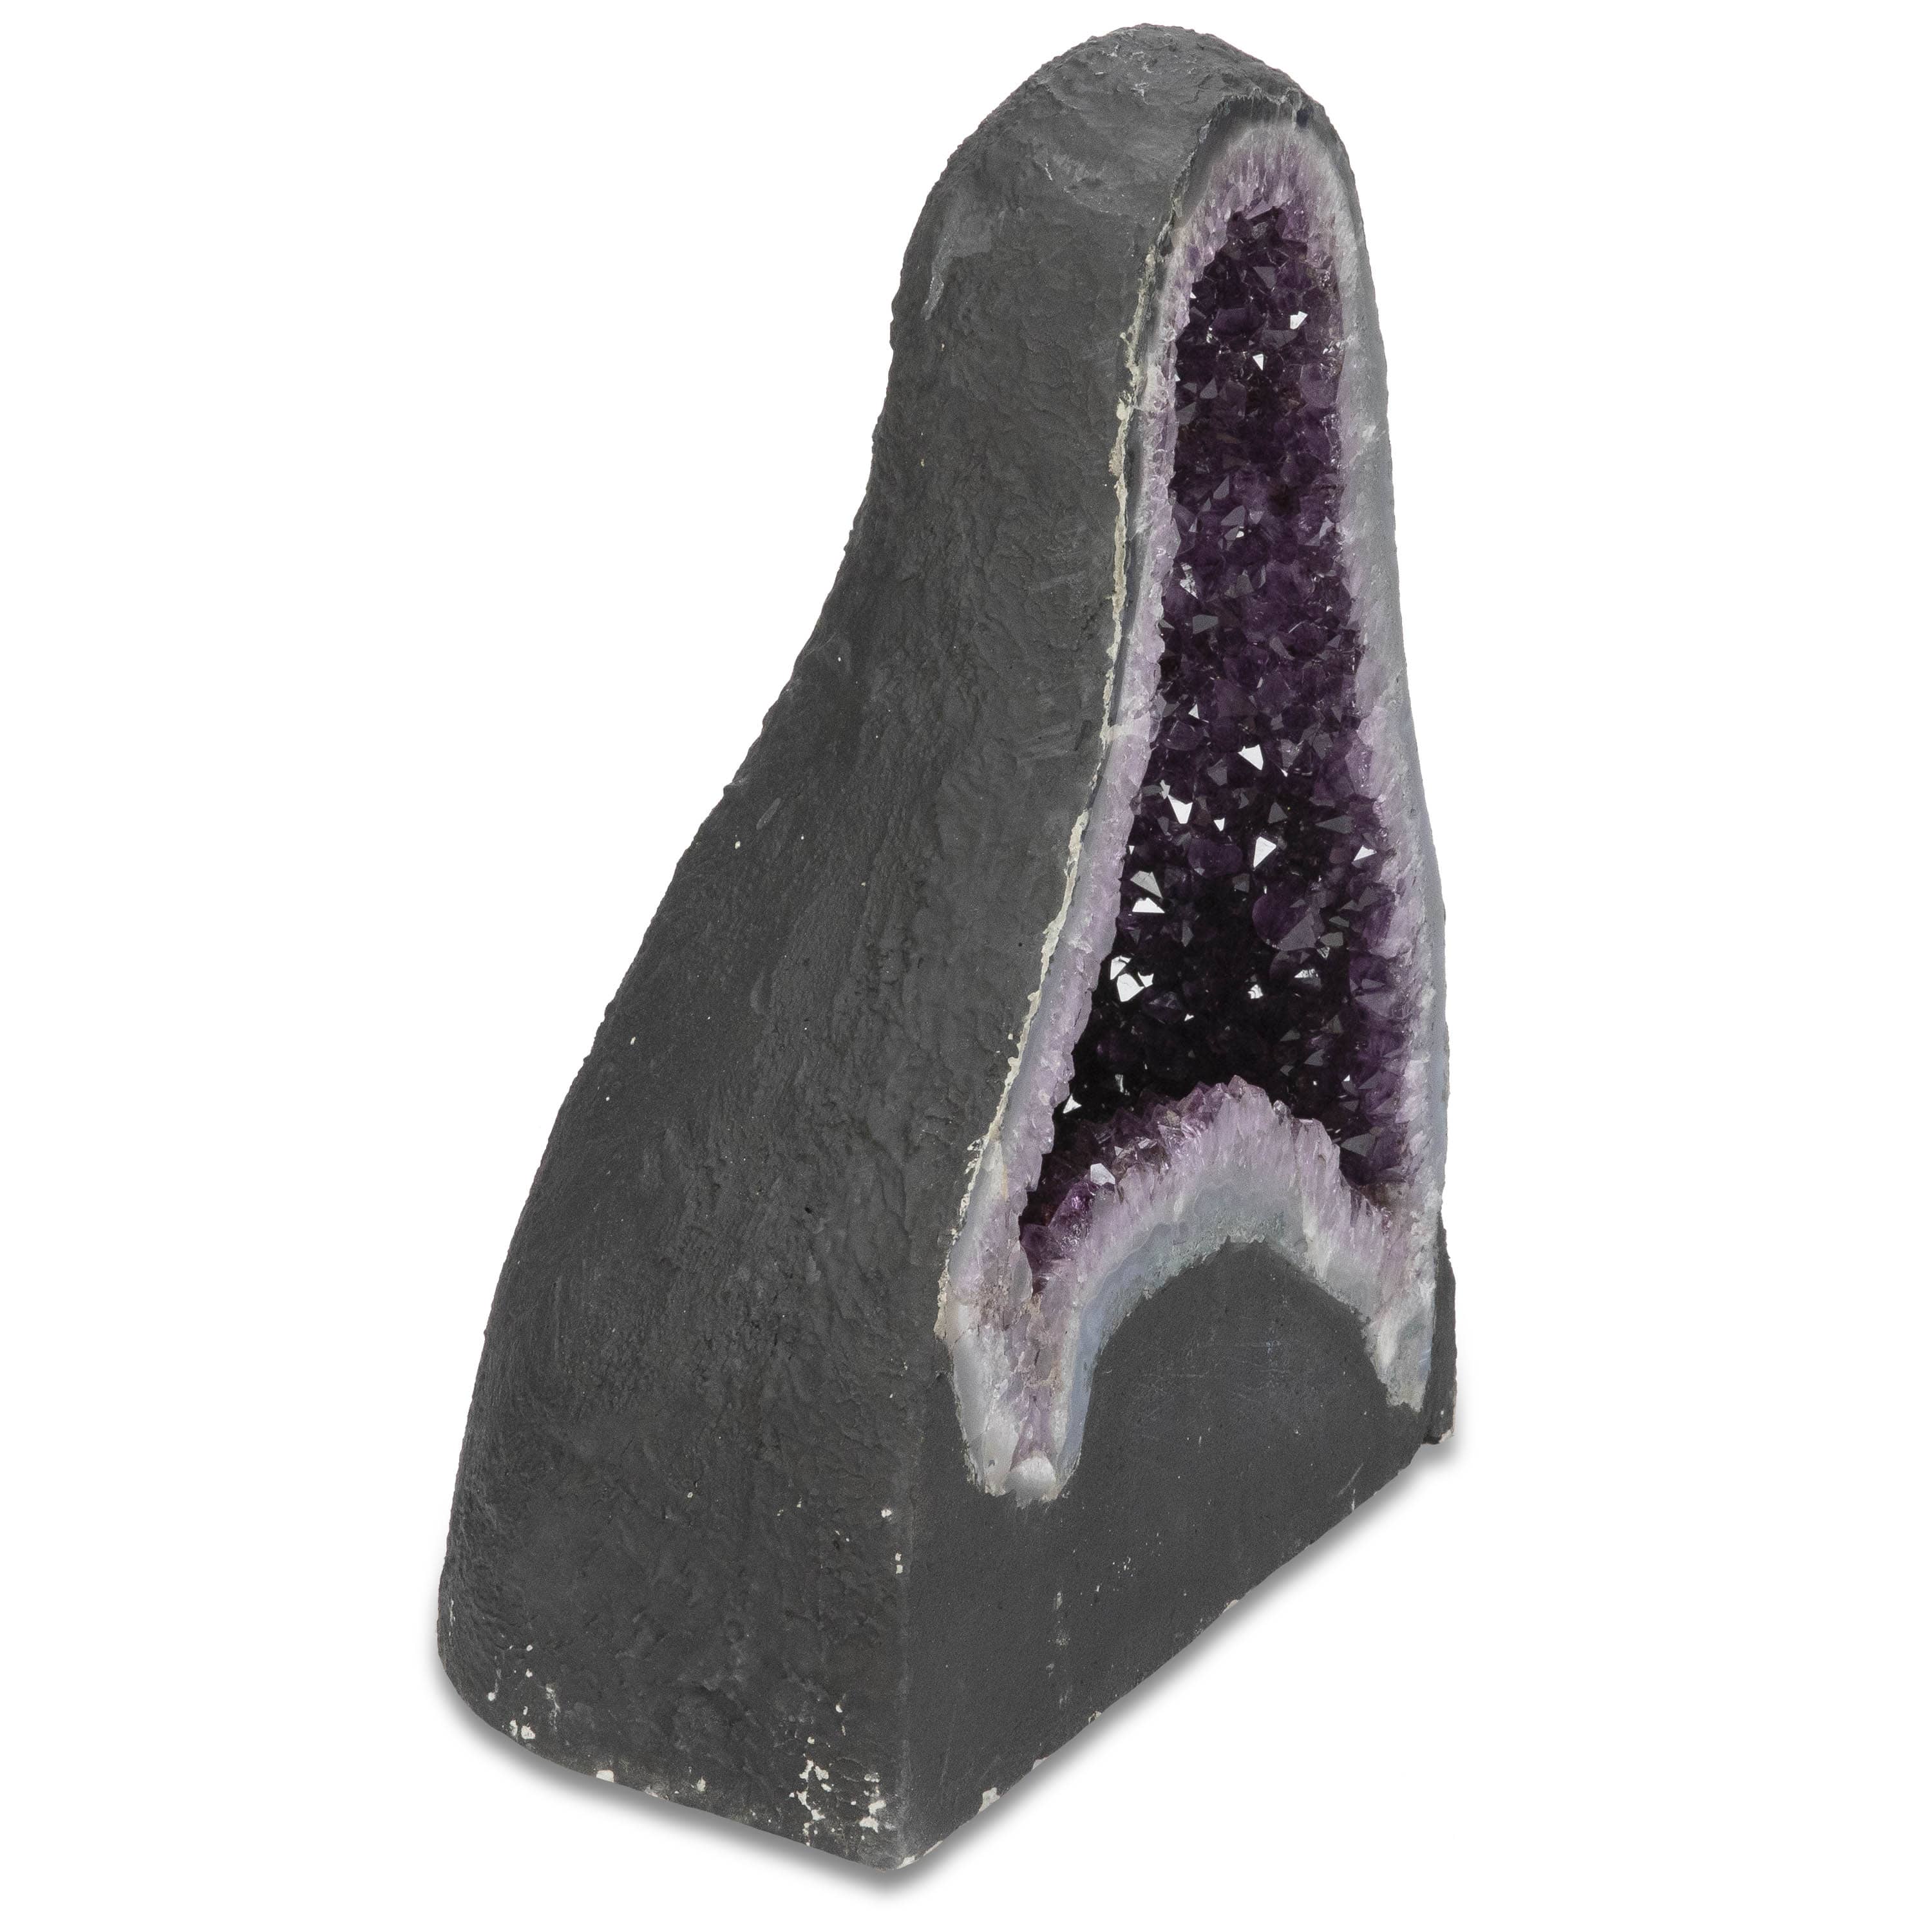 Kalifano Amethyst Amethyst Geode Cathedral - 18" / 68 lbs BAG11000.007